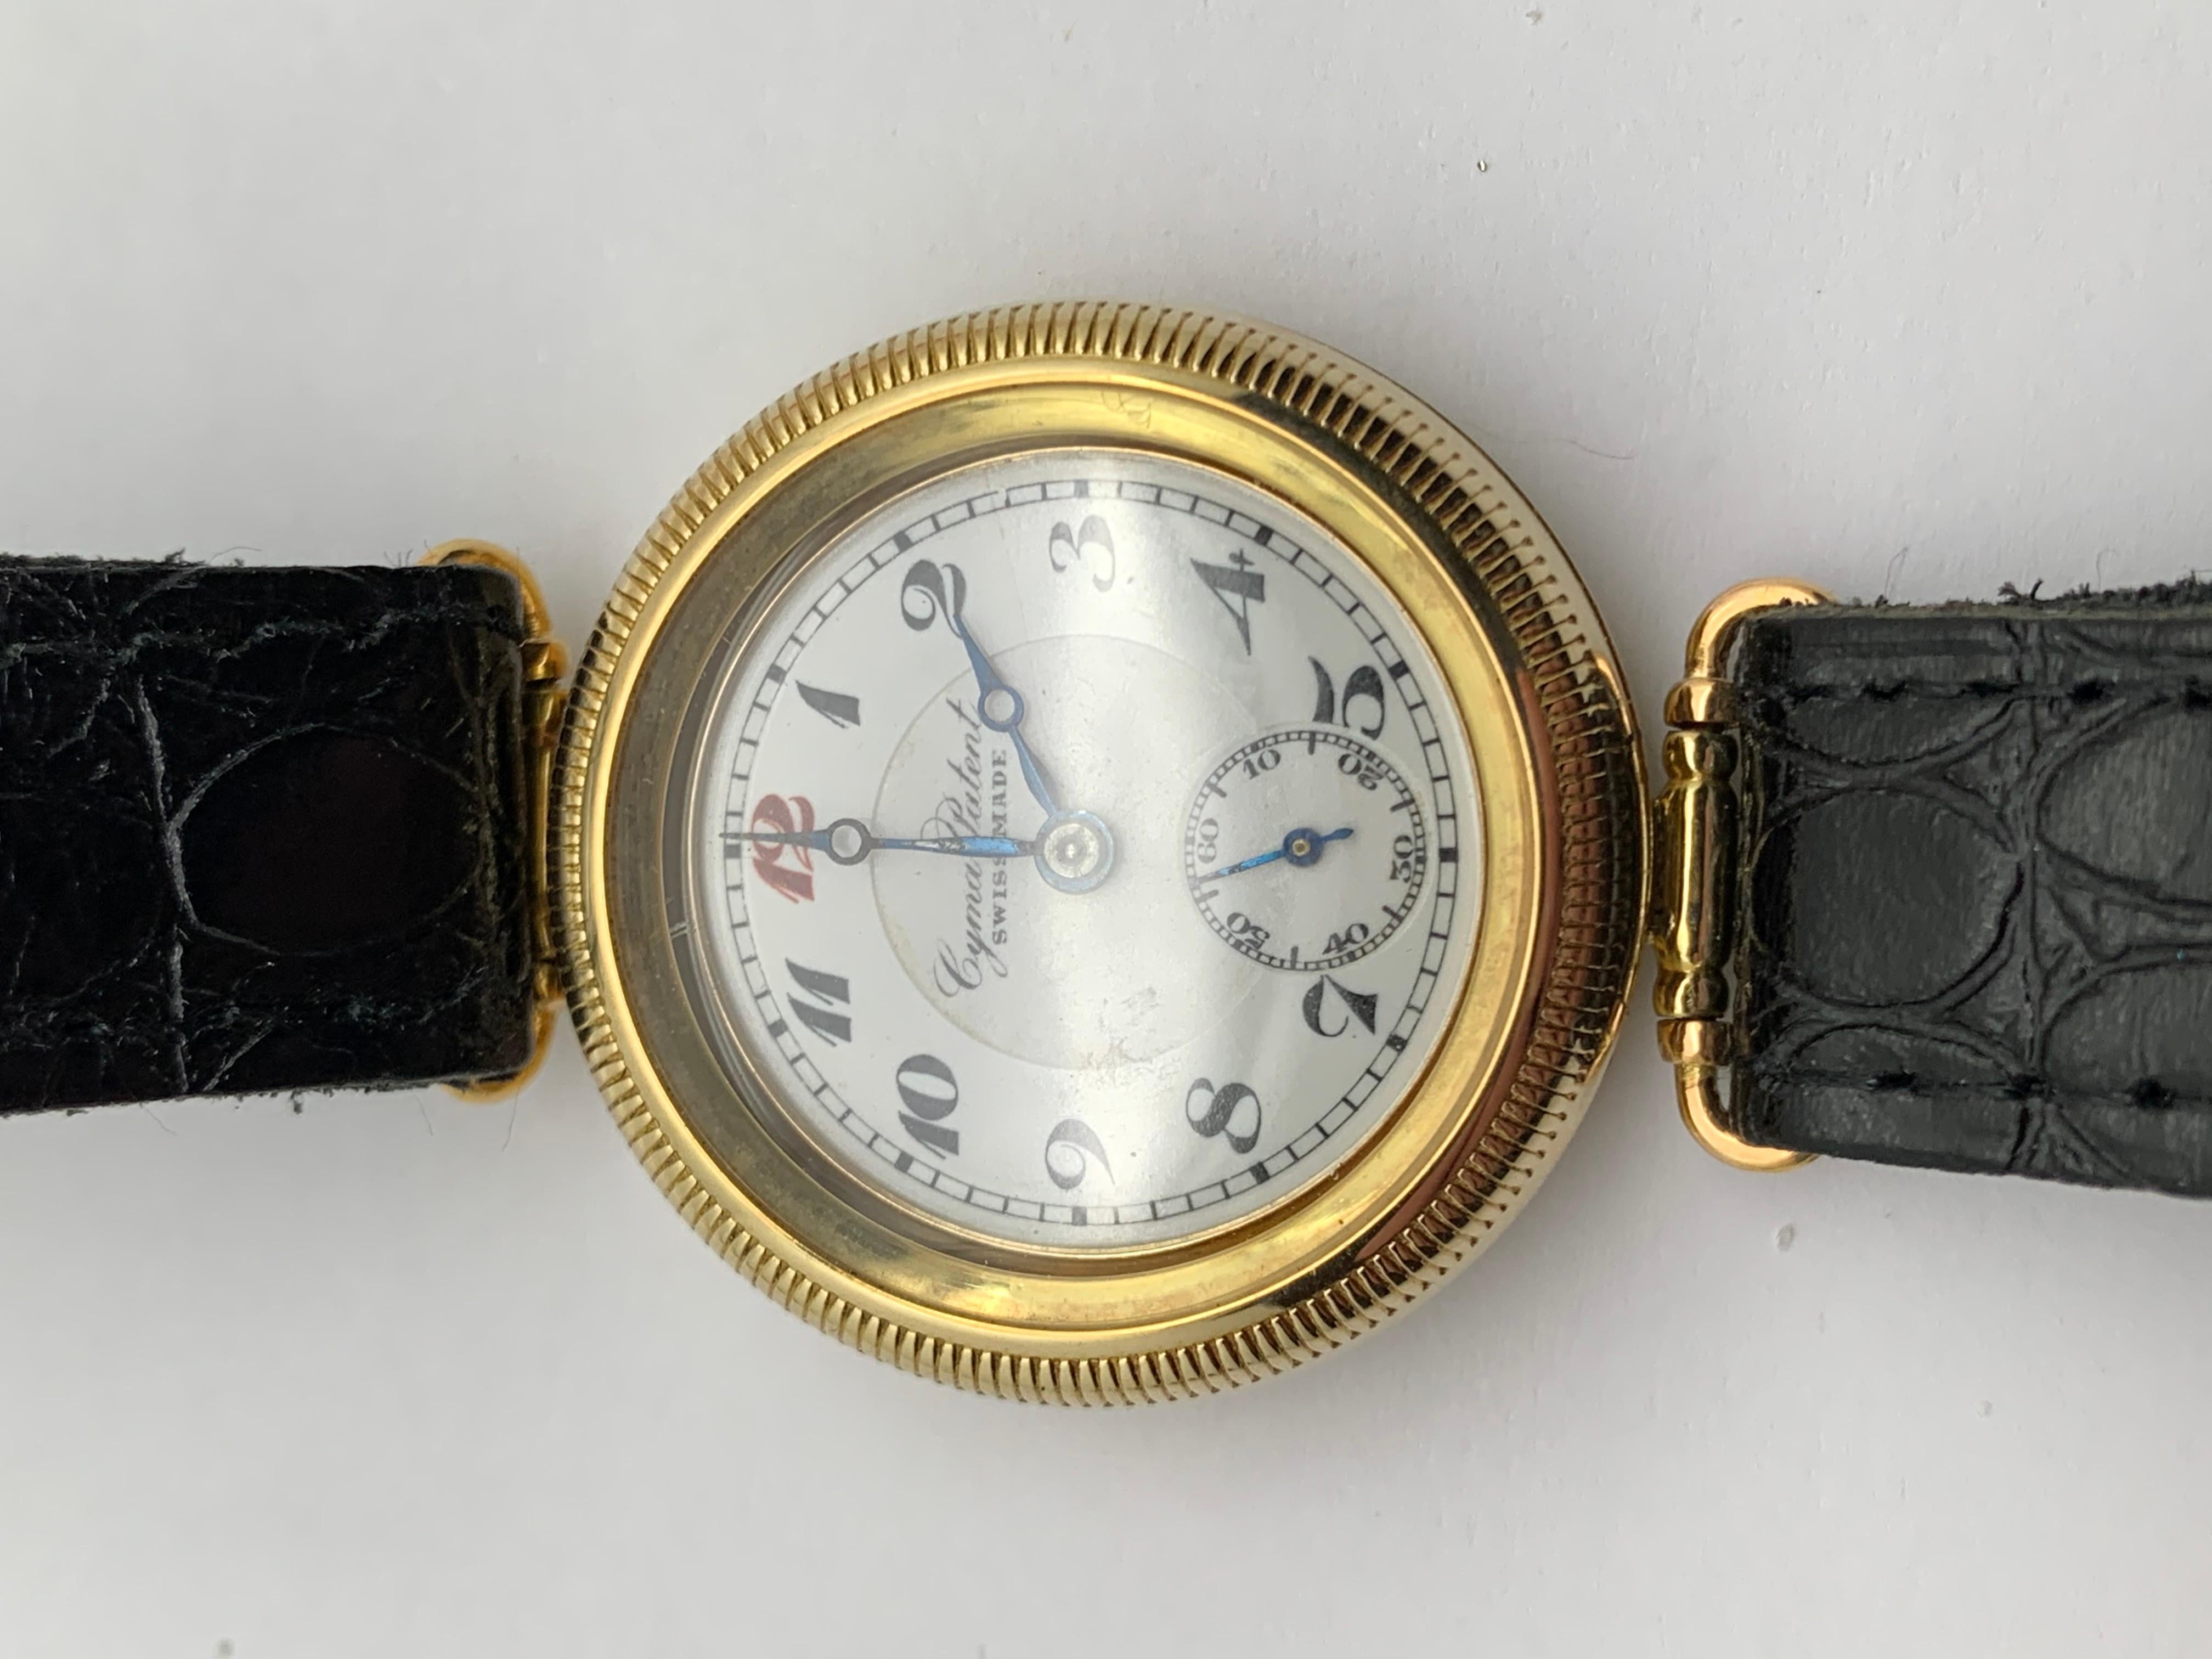 14 karat solid yellow gold Cyma “Hermetic Trench watch with Swing Lugs, that is what you are seeing. In my world of watch collecting, restoration and refinishing, the word “Rare” is often thrown out without any regard to the watch. It is often